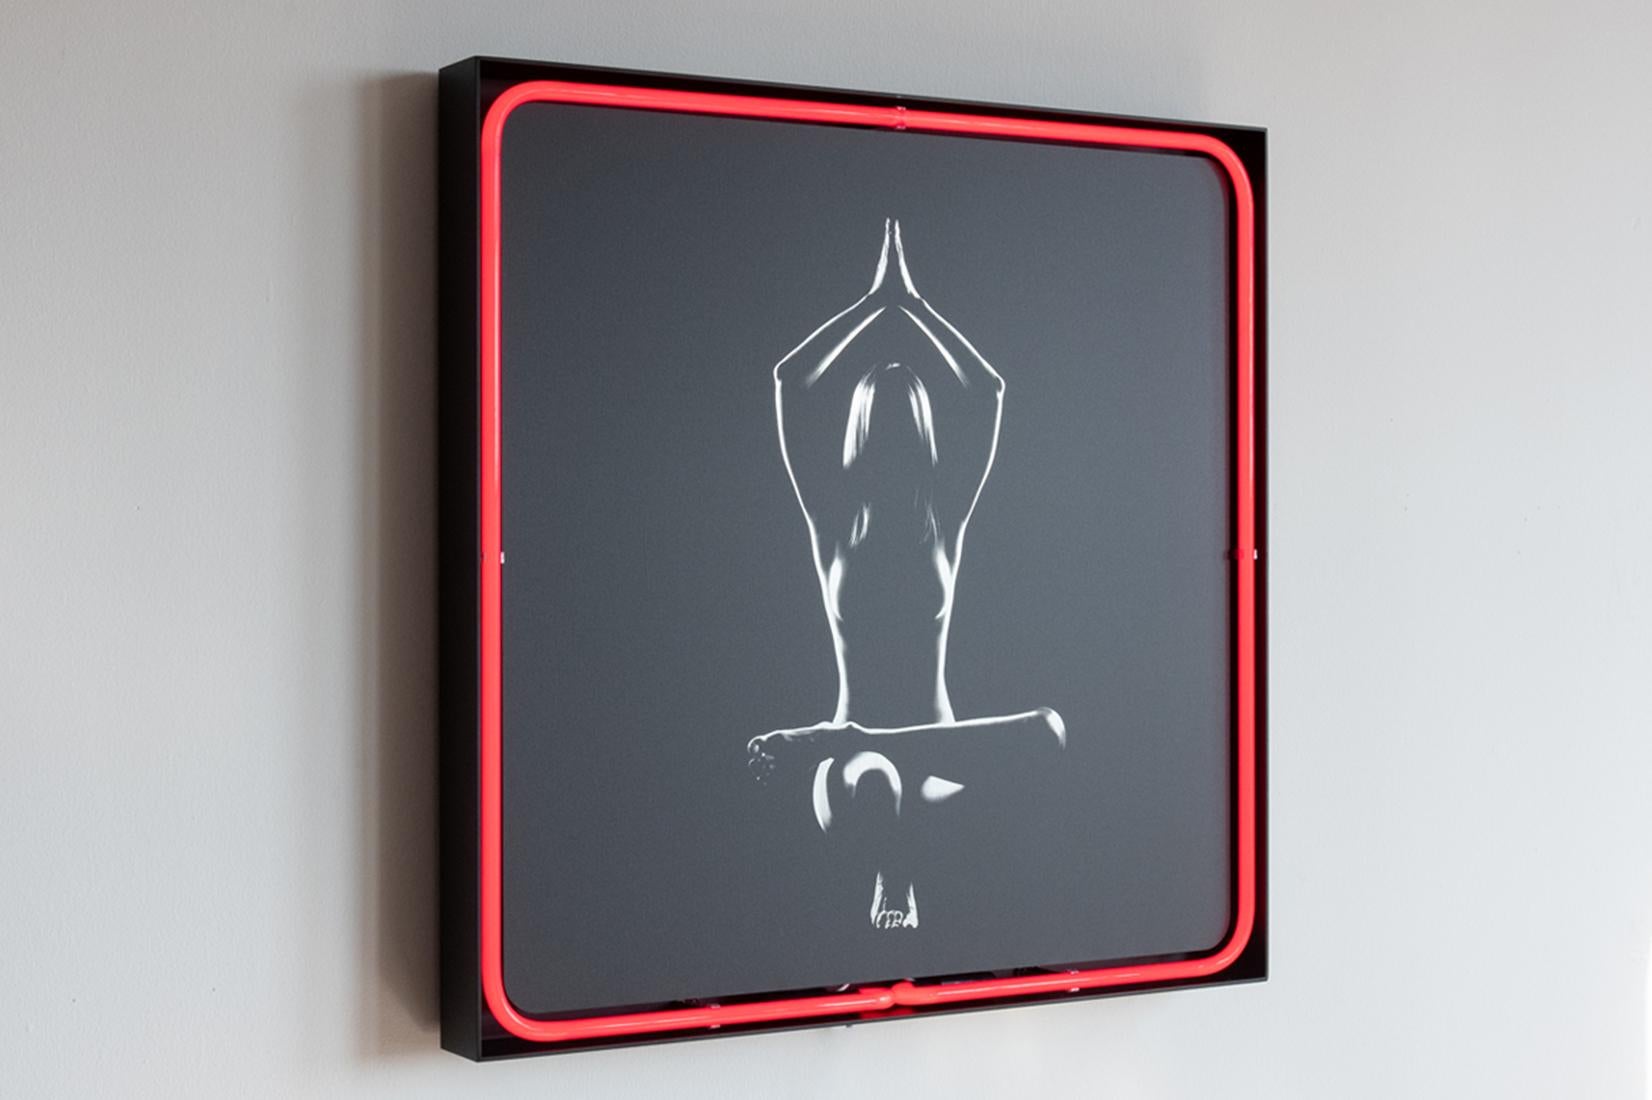 "Root Chakra" Mixed media photography 26" x 26" inch Edition 2/7 by Oleg Char

Medium: UV print on Aluminum Dibond, glass neon, wood backing, metal frame.

Root Chakra - Muladhara 
The Root Chakra is the very foundation of our being, the anchor that